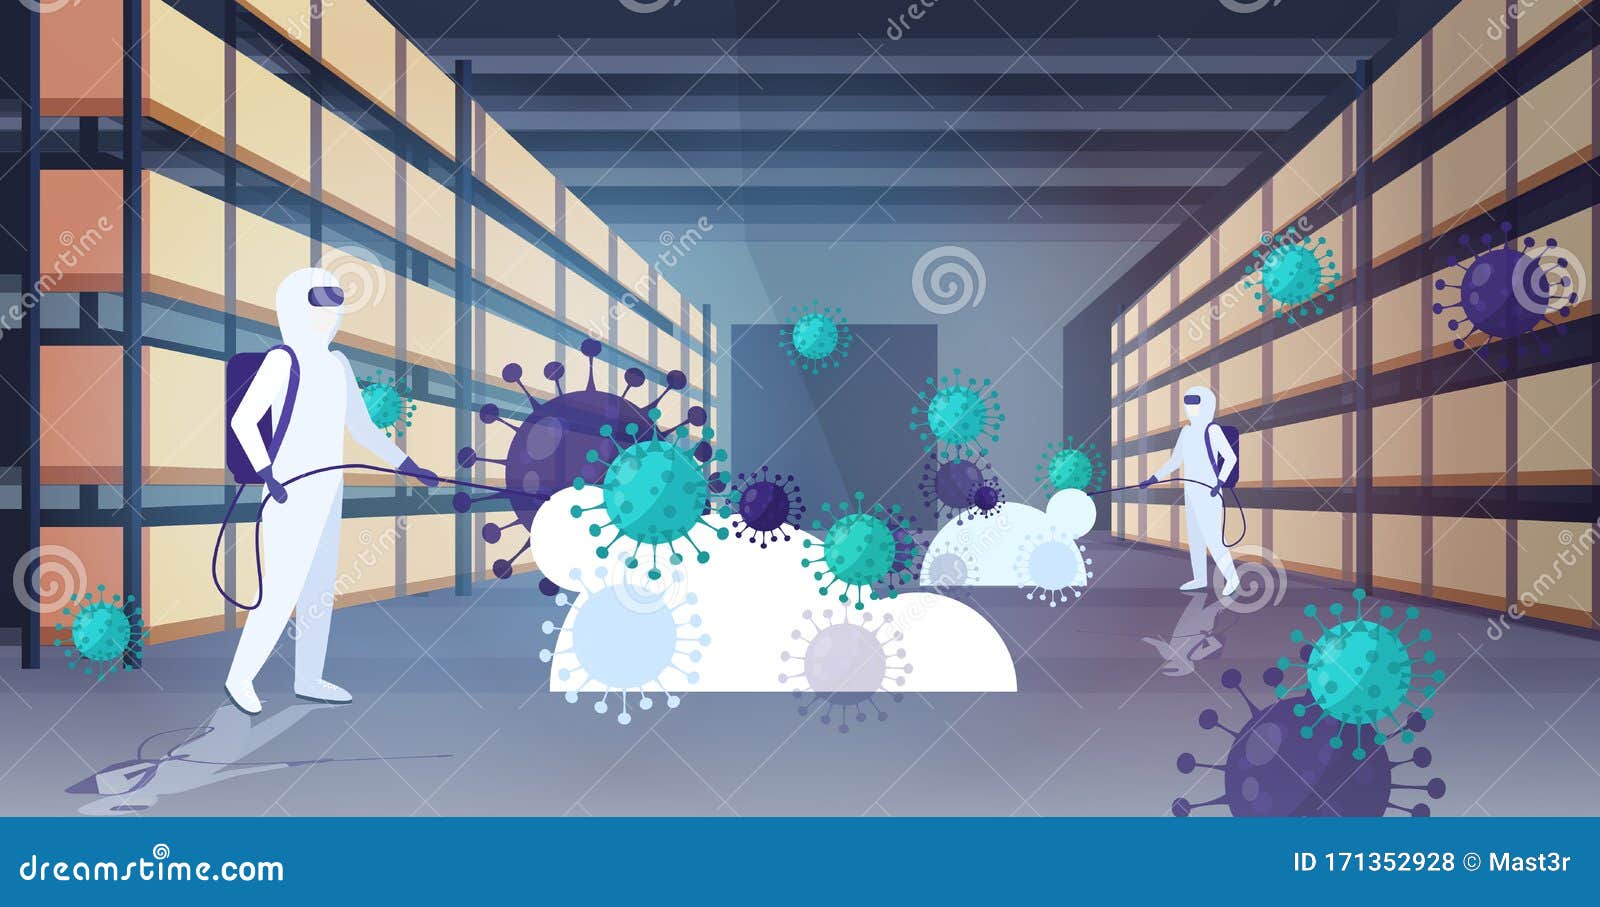 specialists in hazmat suits cleaning disinfecting coronavirus cells epidemic mers-cov warehouse interior wuhan 2019-ncov